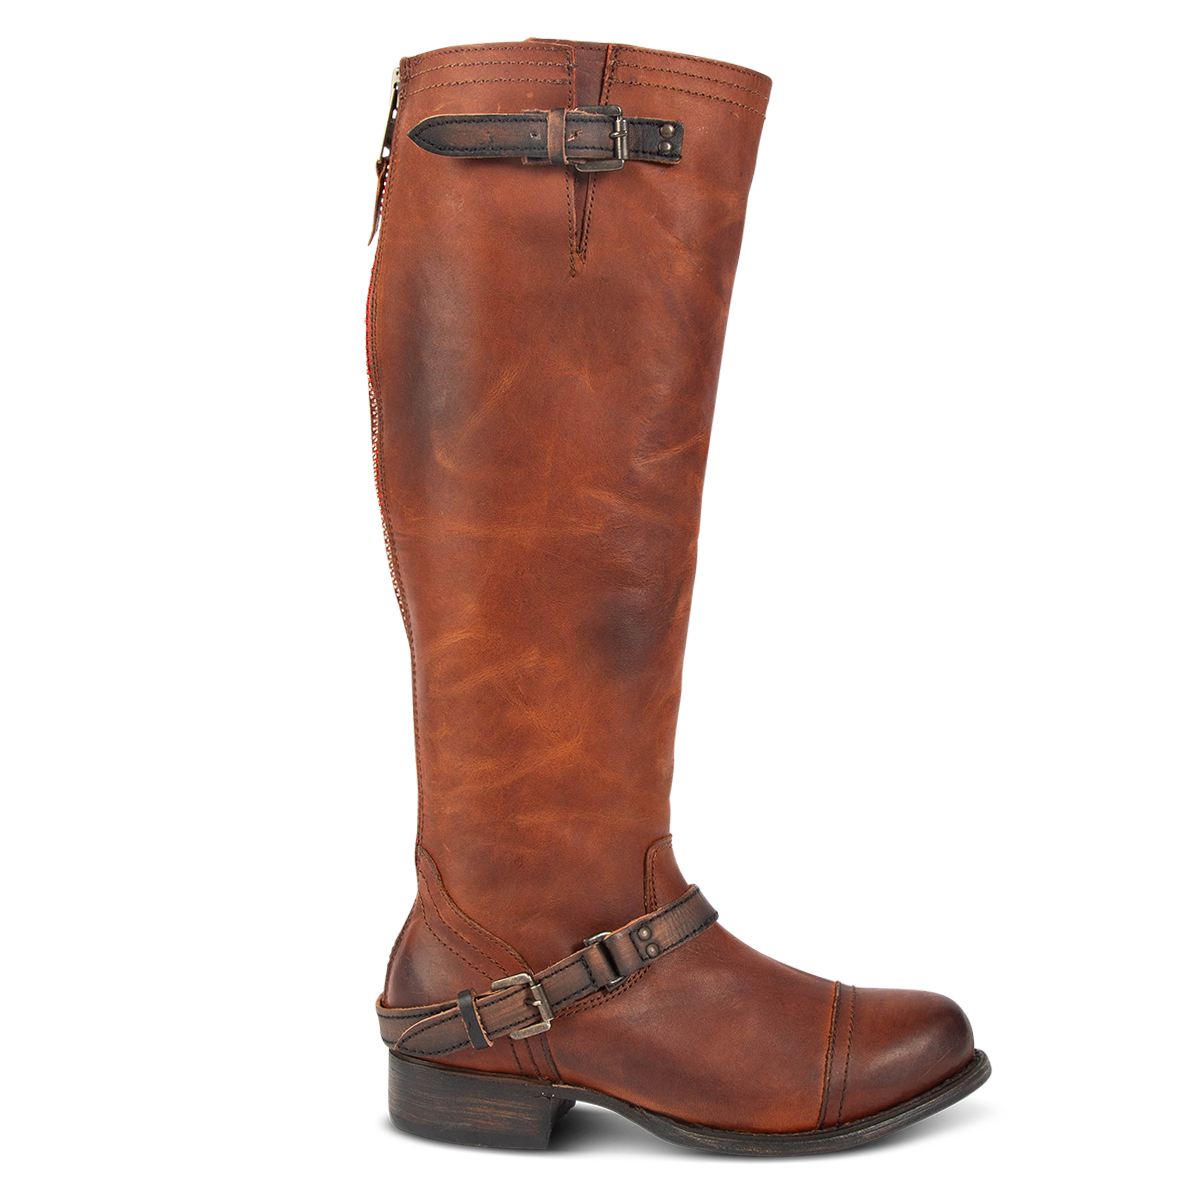 FREEBIRD women's Roadey cognac tall construction boot with double buckle detailing and signature red tracked zipper